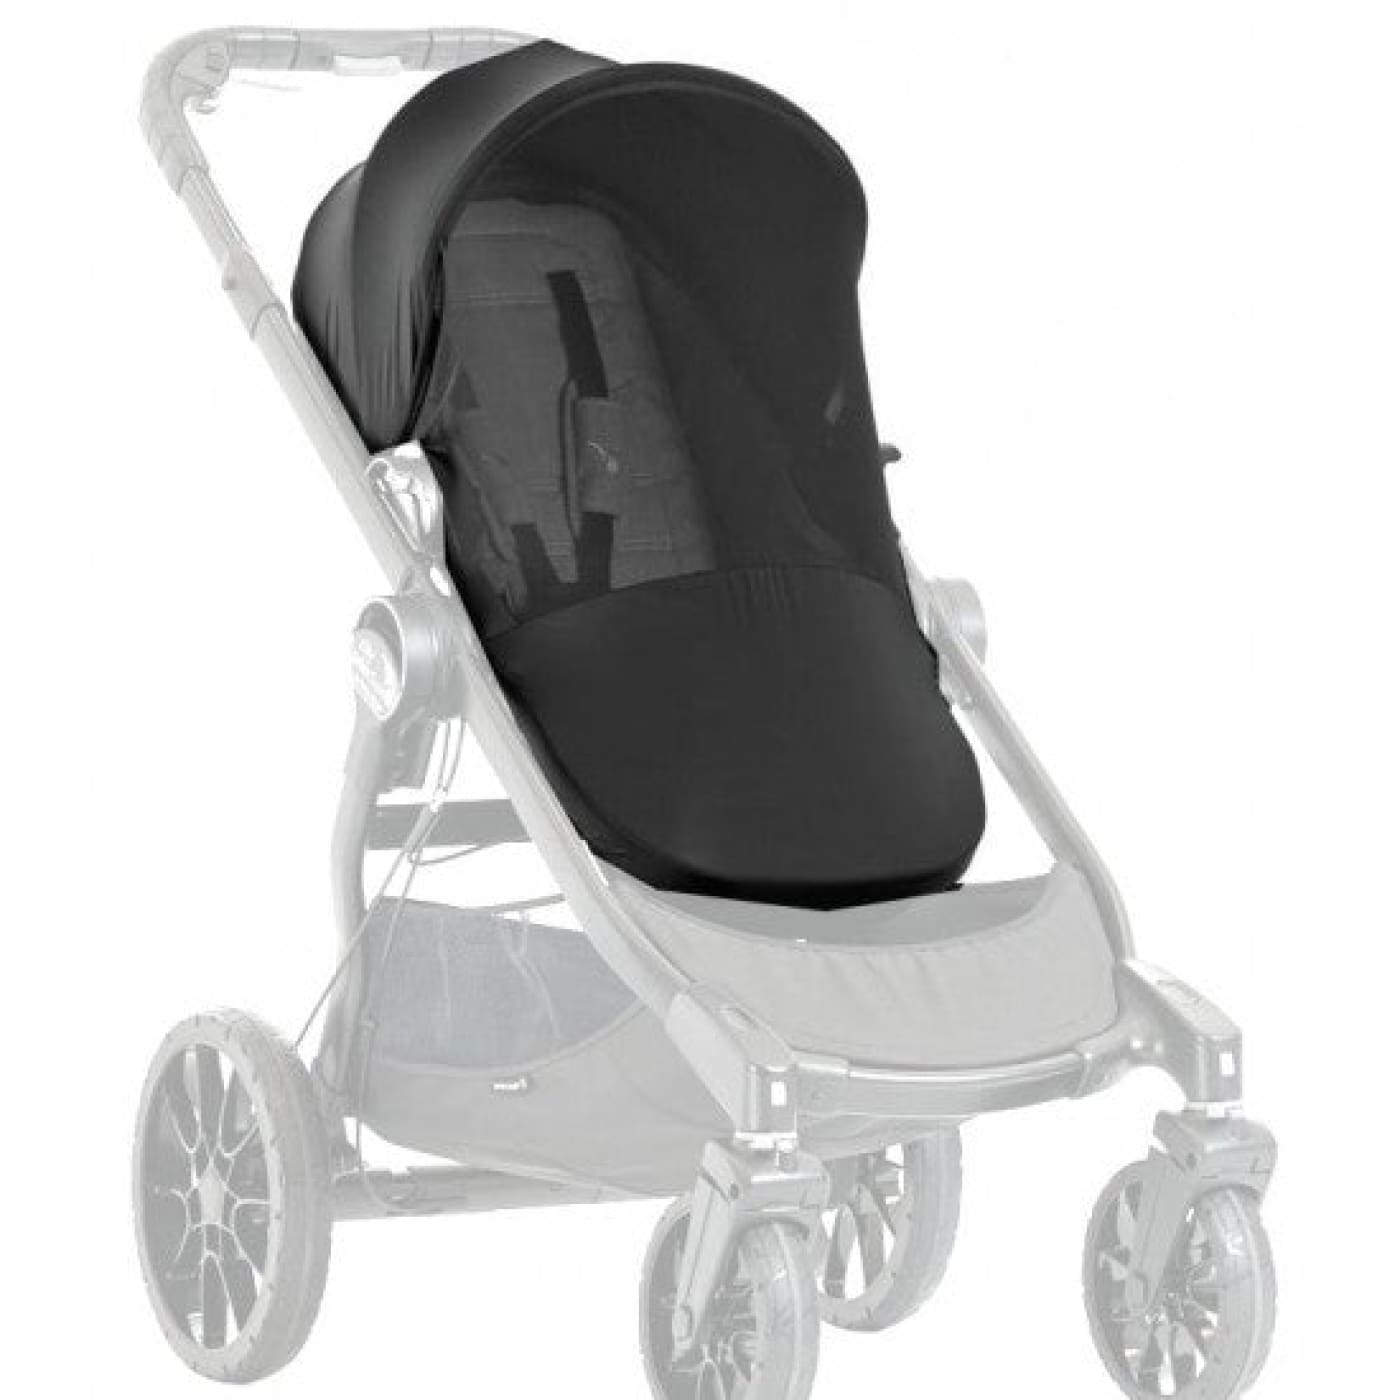 Baby Jogger City Select / City Select 2 / Select Lux Bug Cover - PRAMS & STROLLERS - SUN COVERS/WEATHER SHIELDS